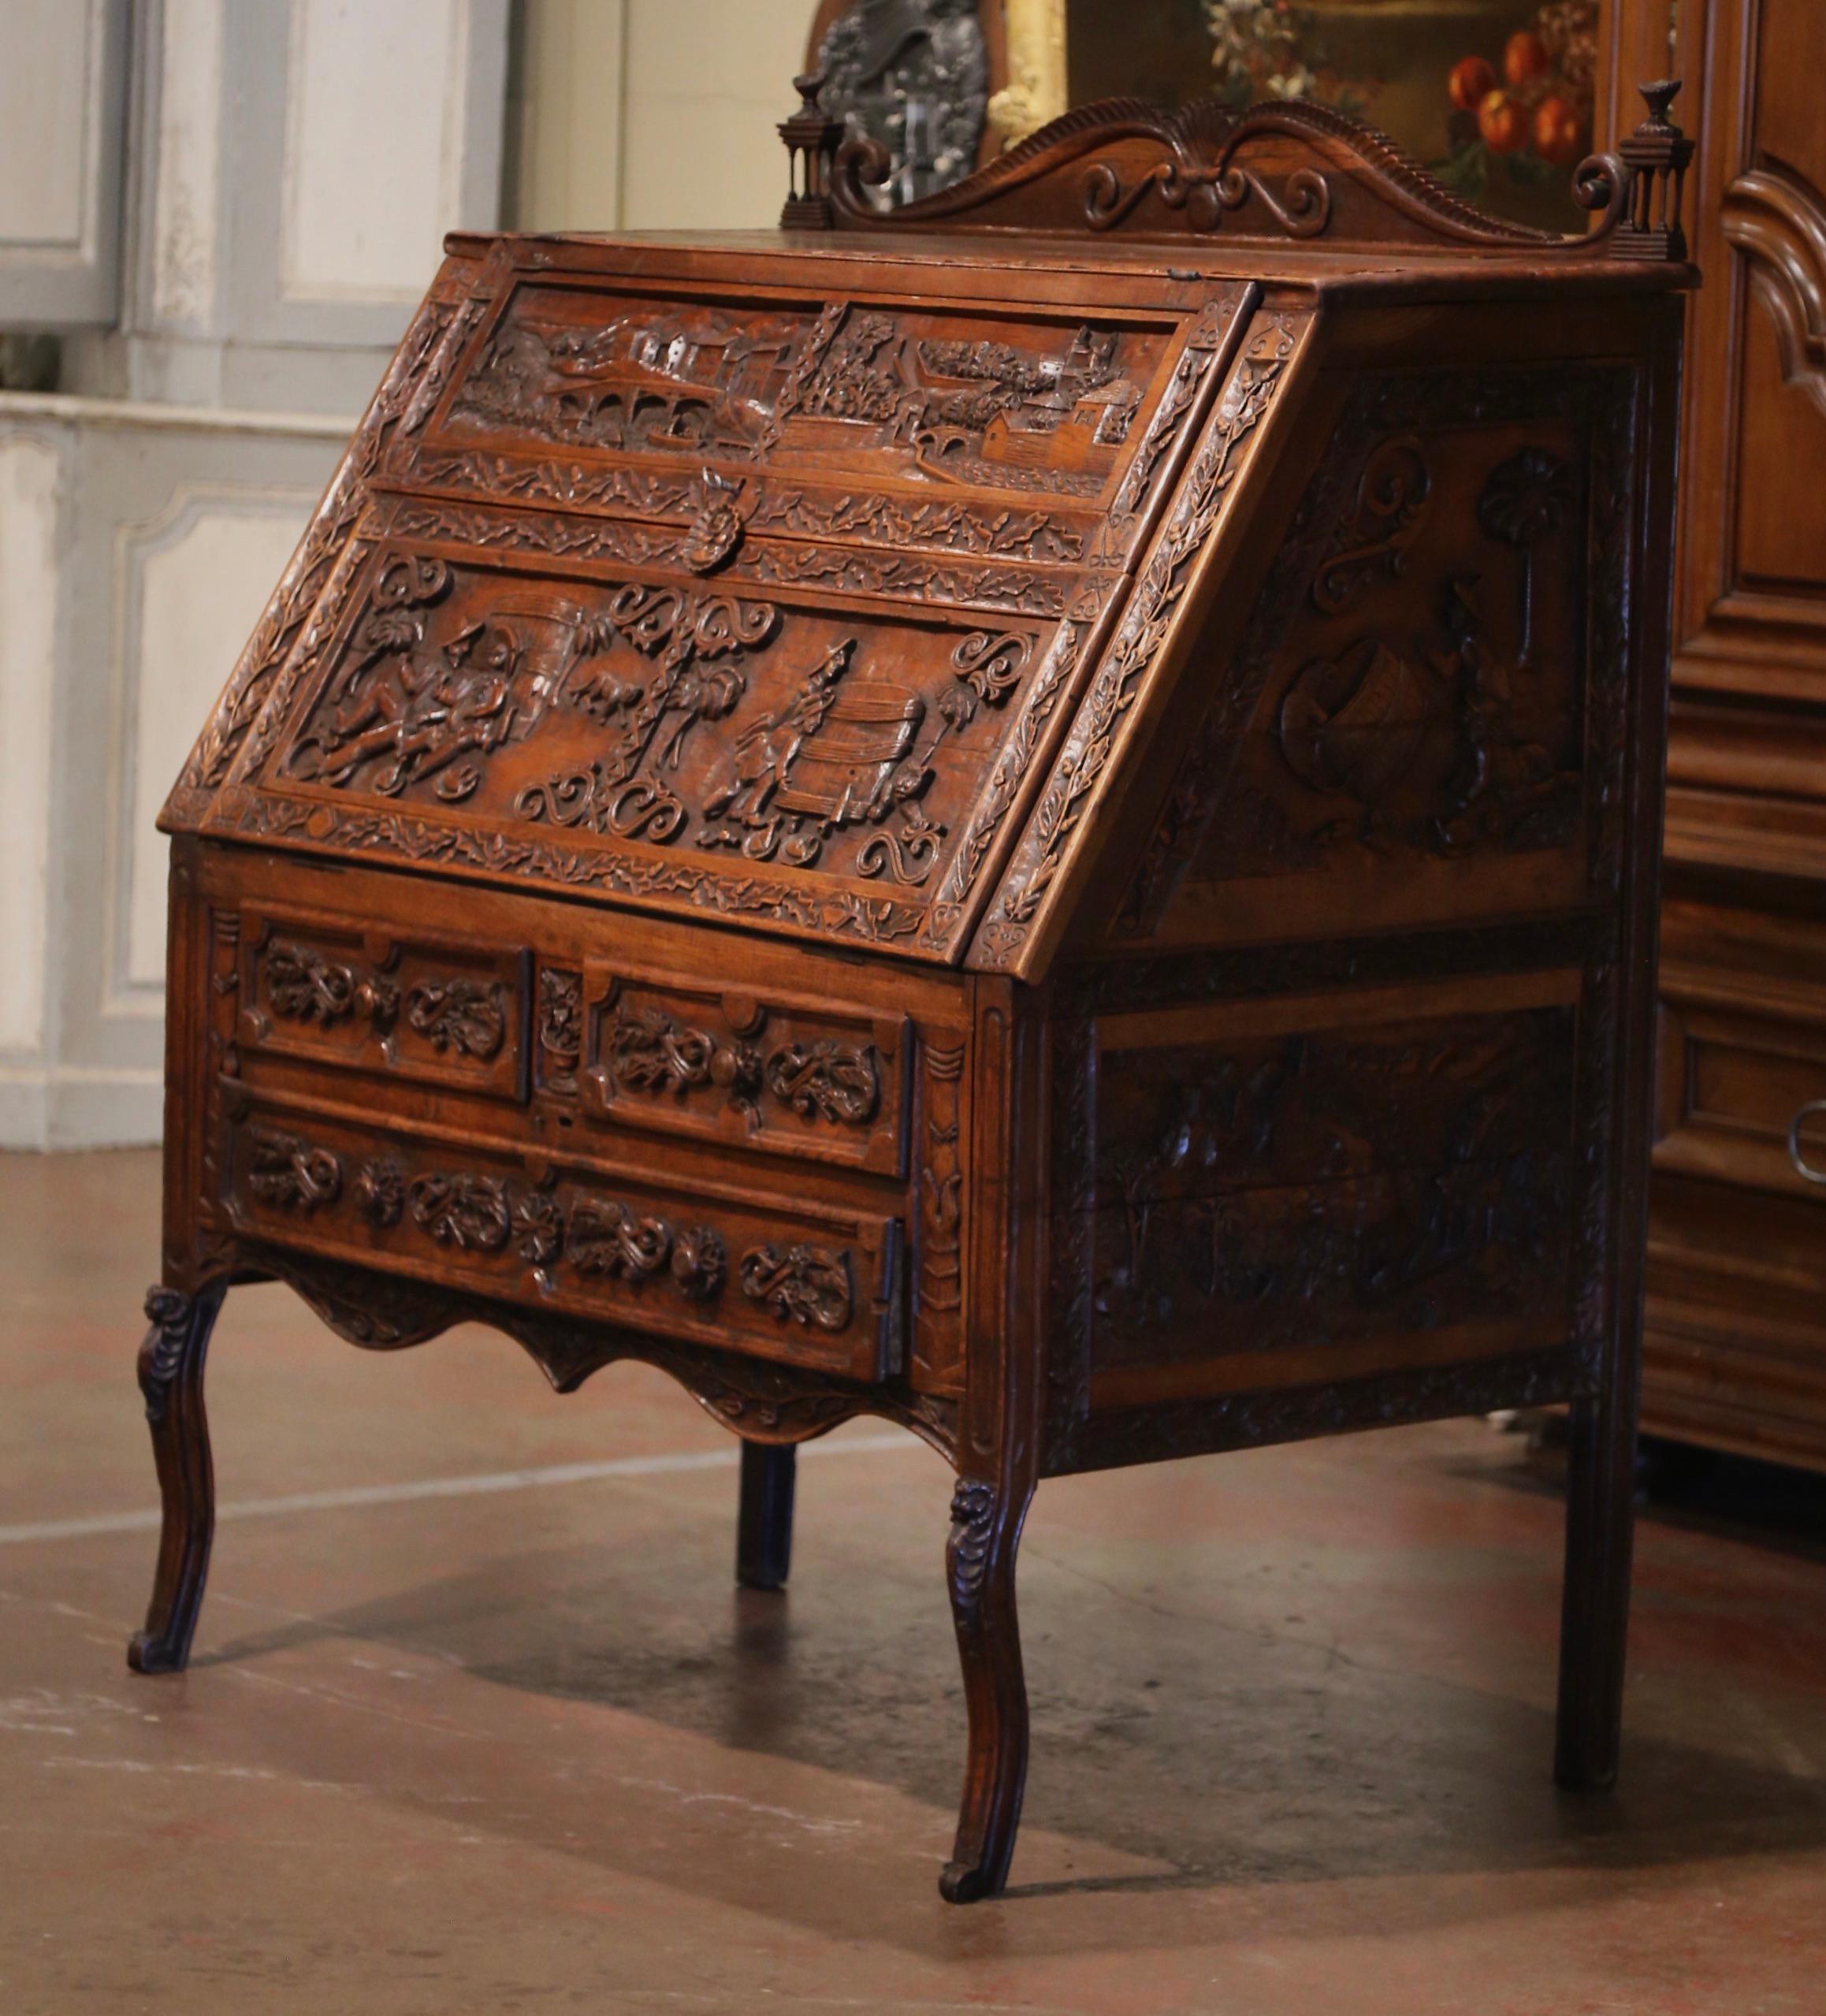 Hand carved in northern France circa 1860, the 